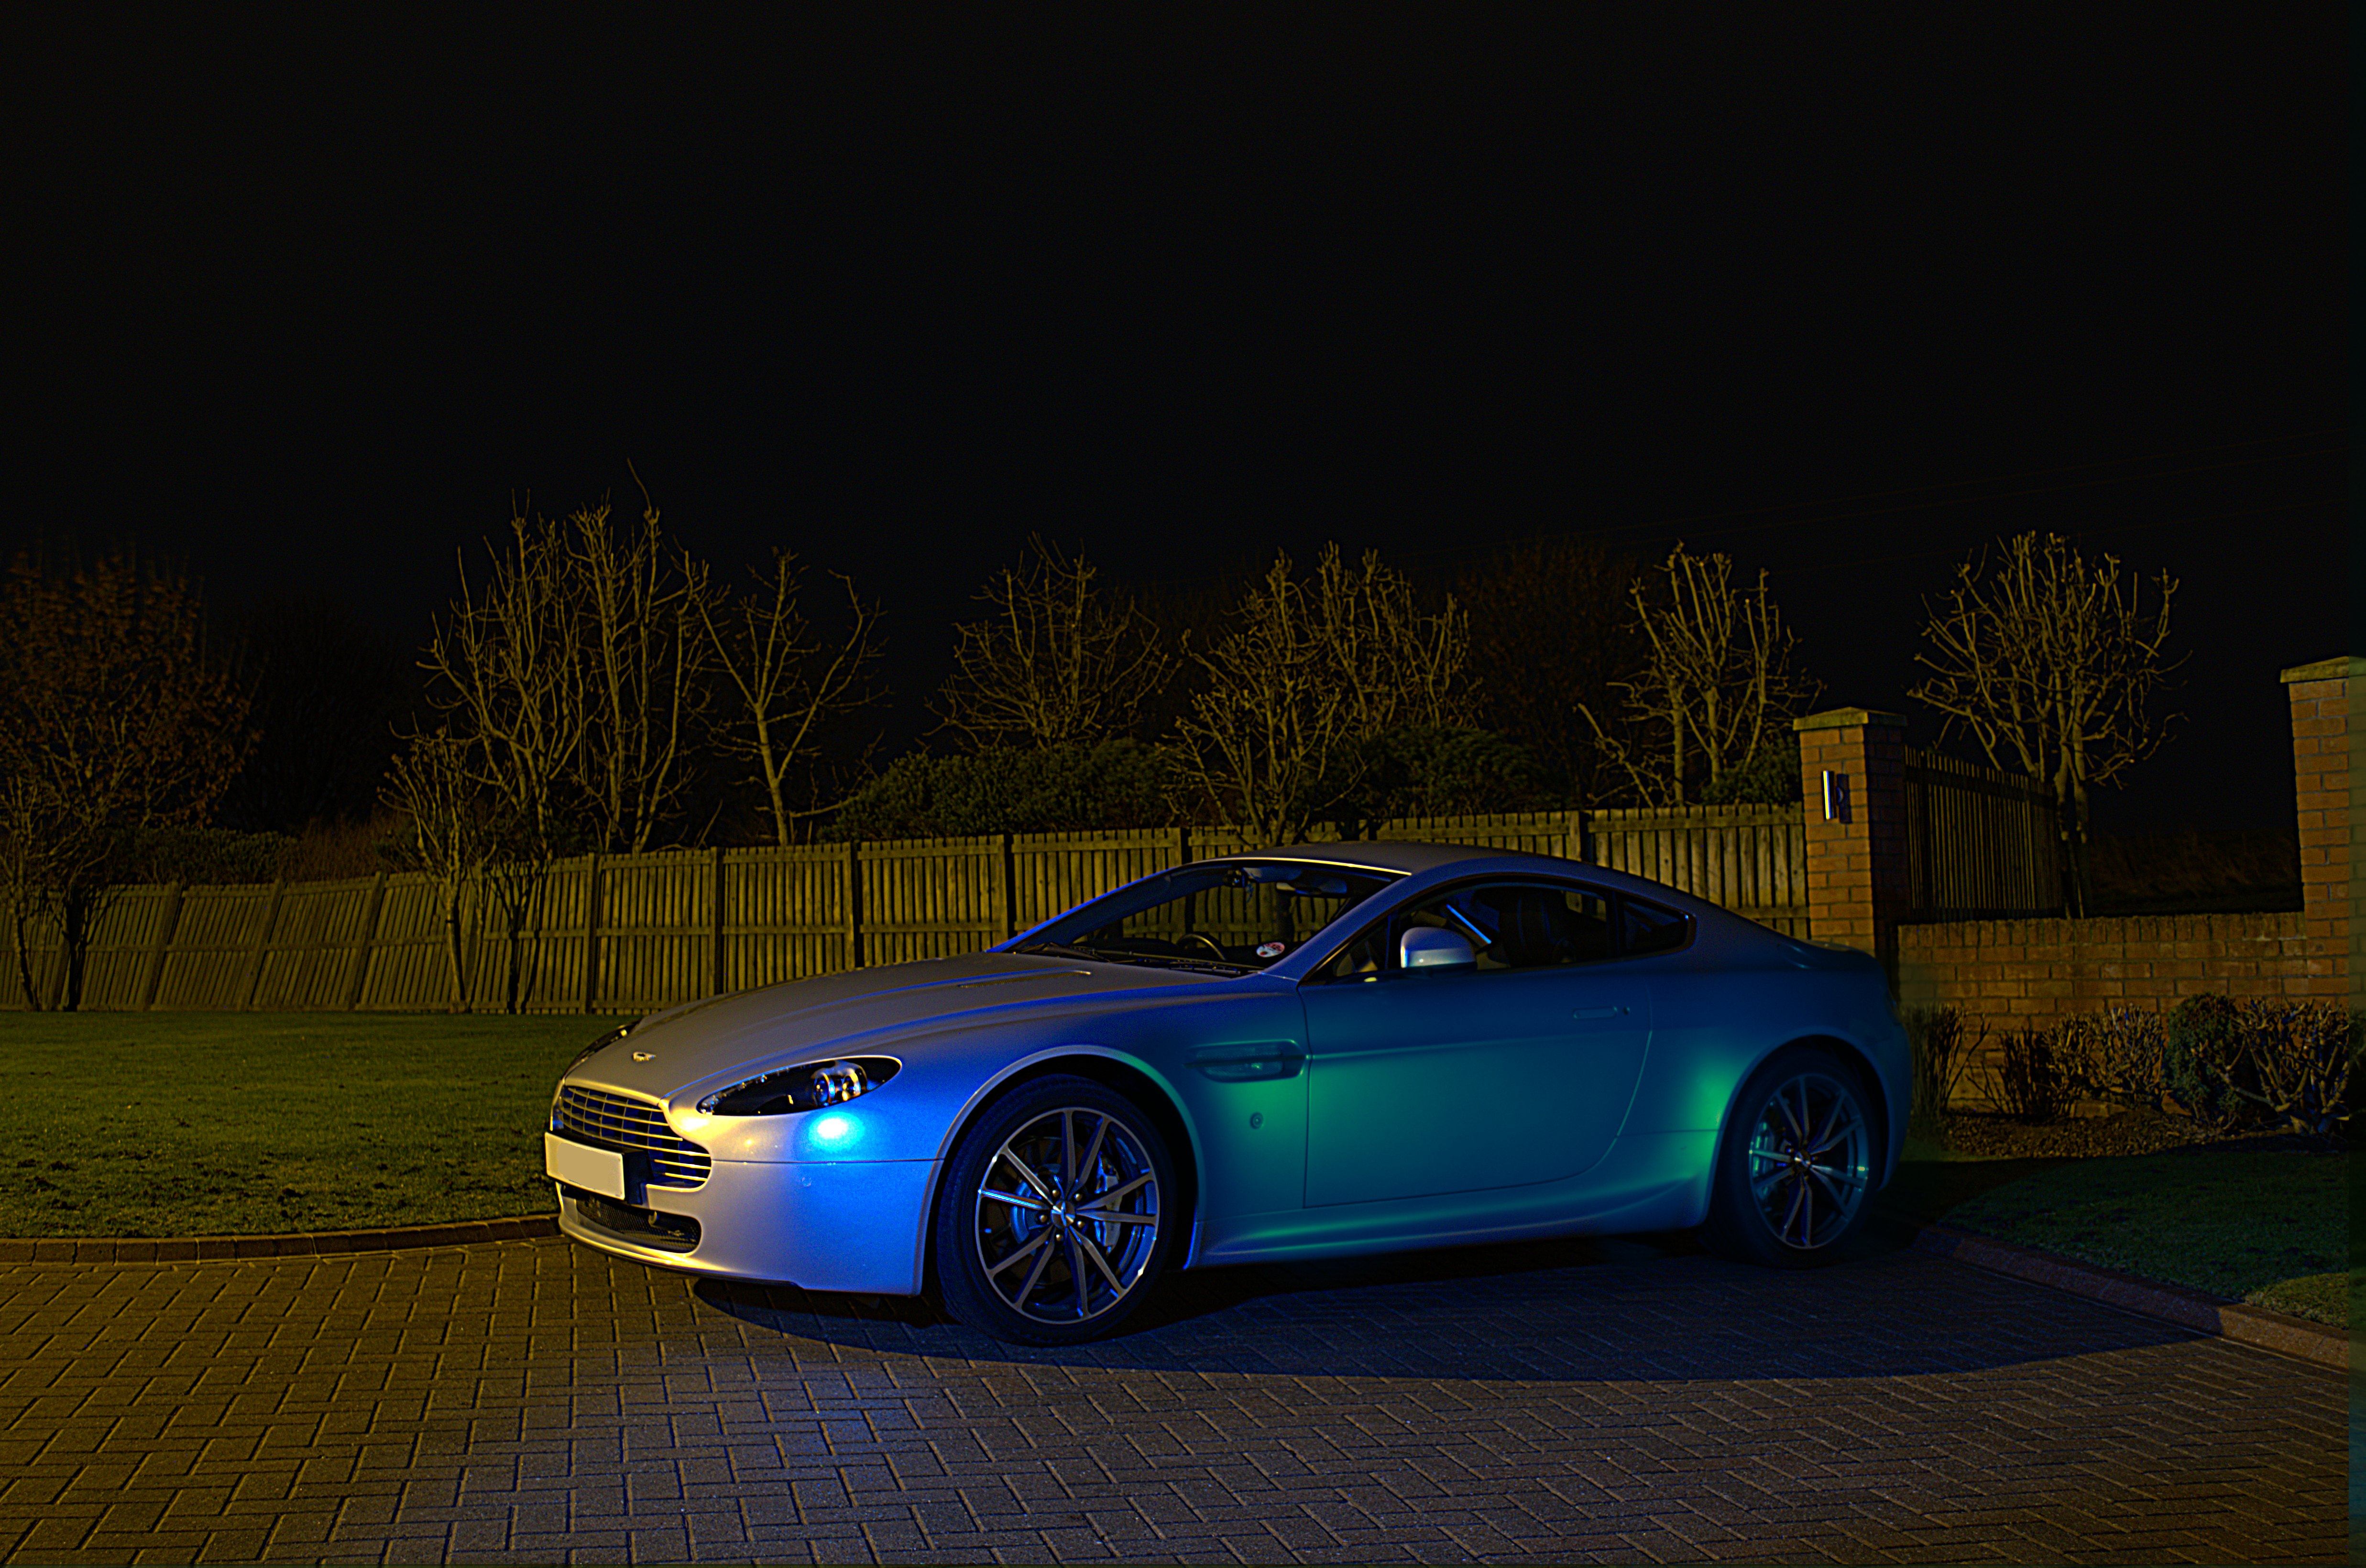 Car [static] photos at night - Page 2 - Photography & Video - PistonHeads